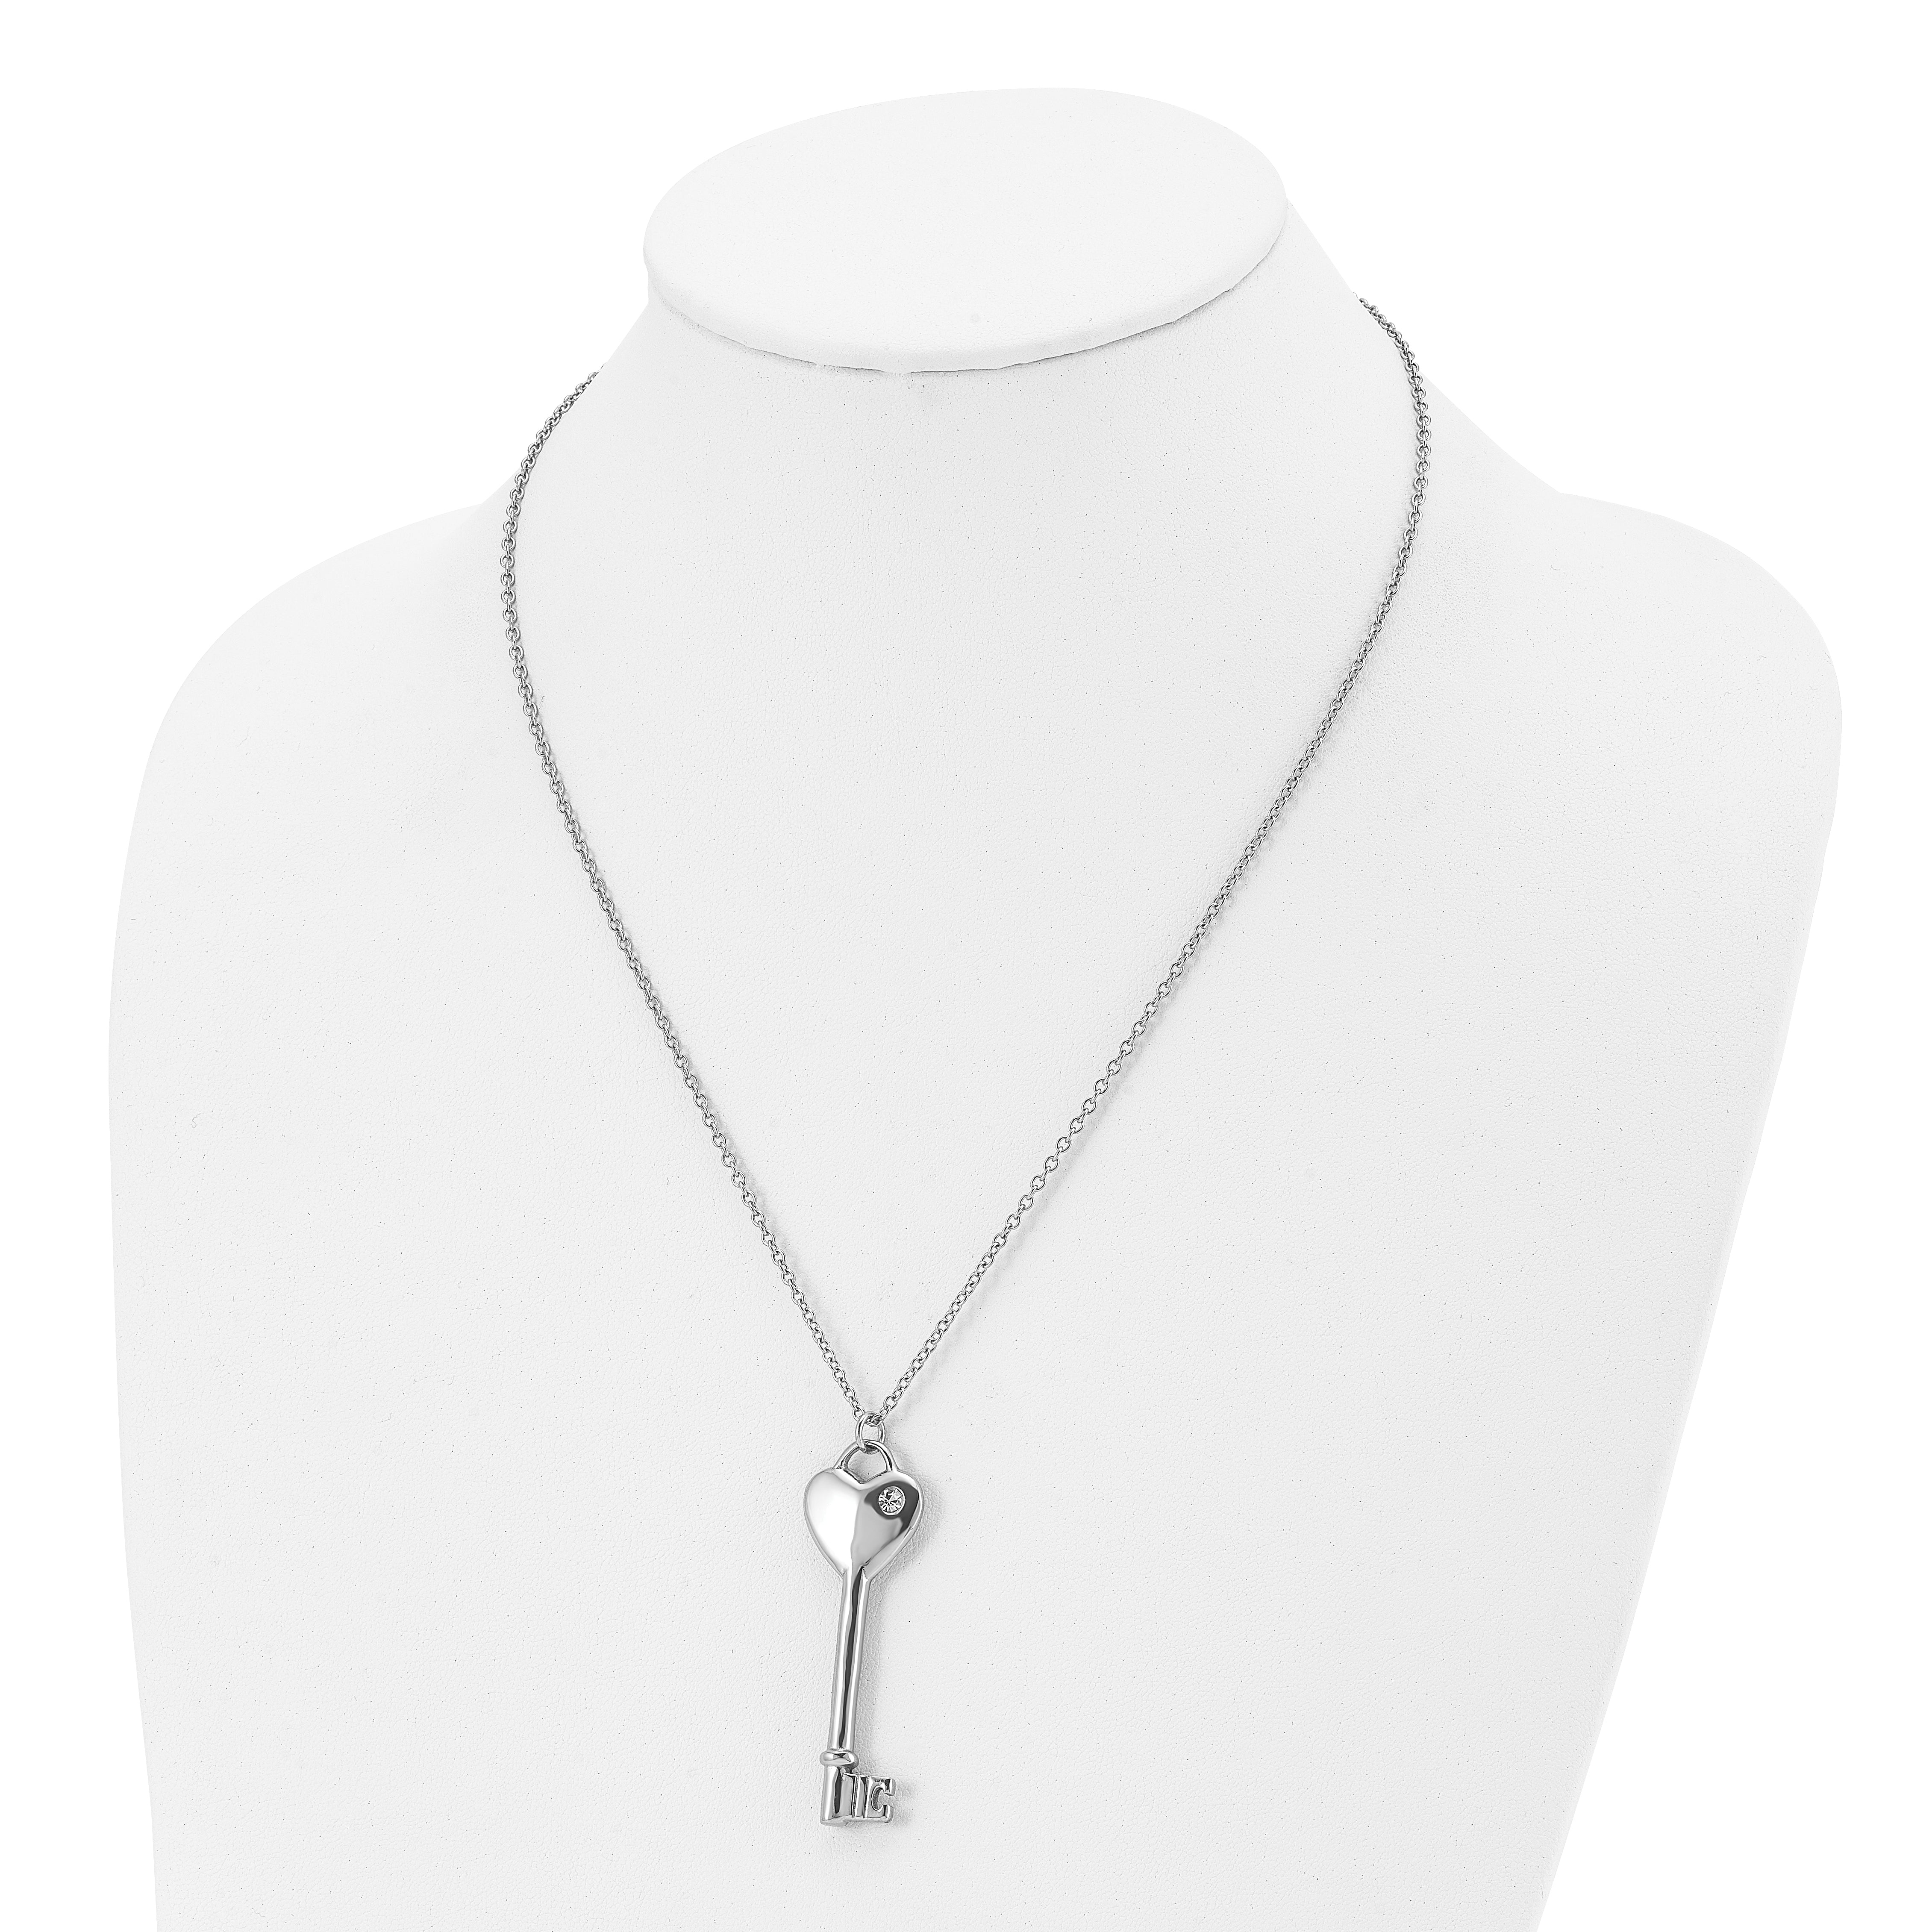 Chisel Stainless Steel Polished with CZ Heart Key Pendant on a 20 inch Cable Chain Necklace